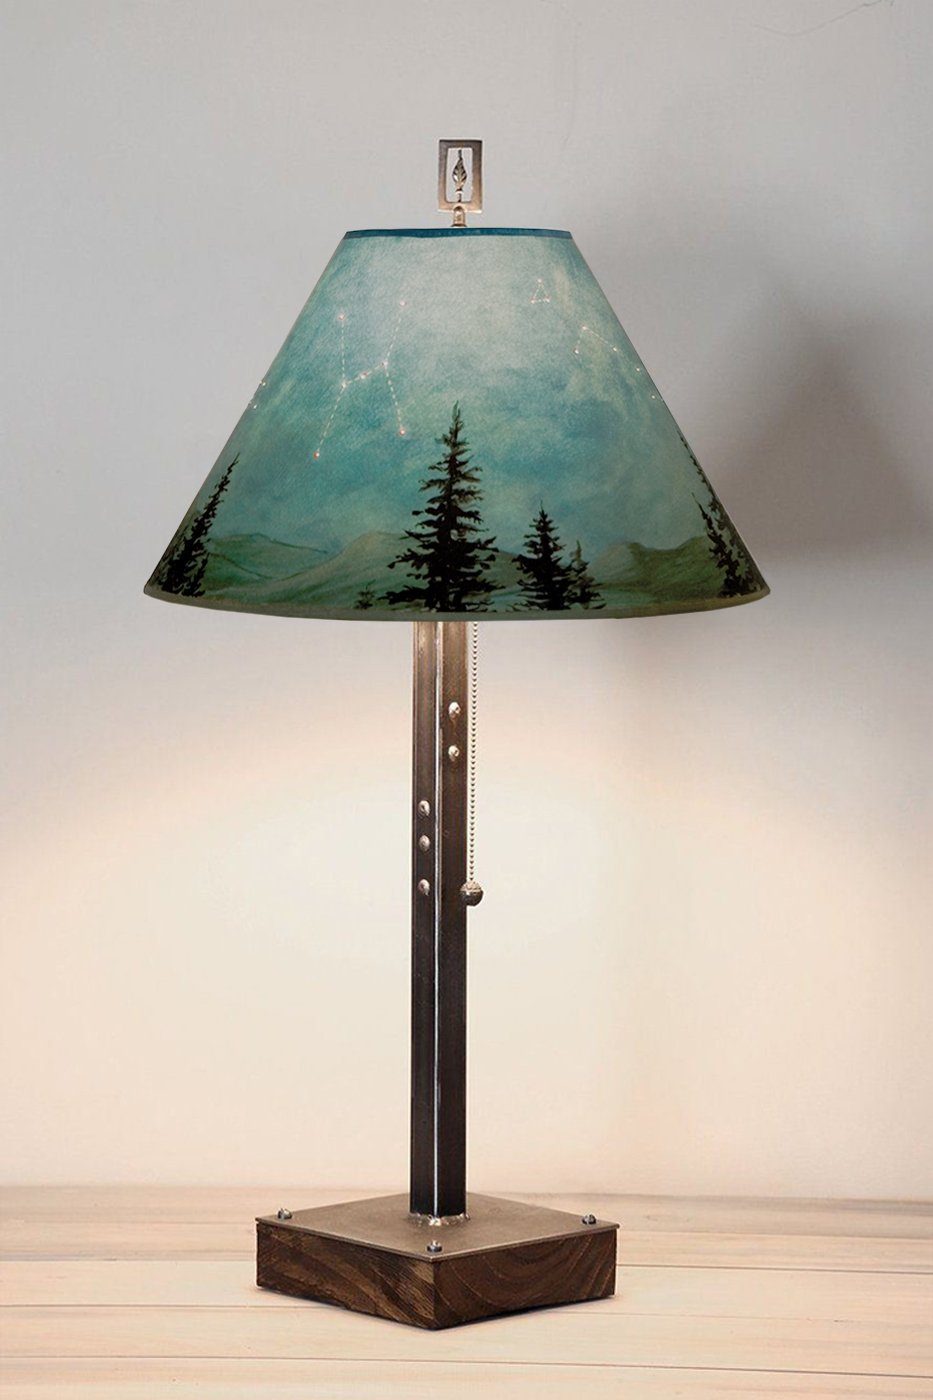 Steel Table Lamp on Wood with Medium Conical Shade in Midnight Sky